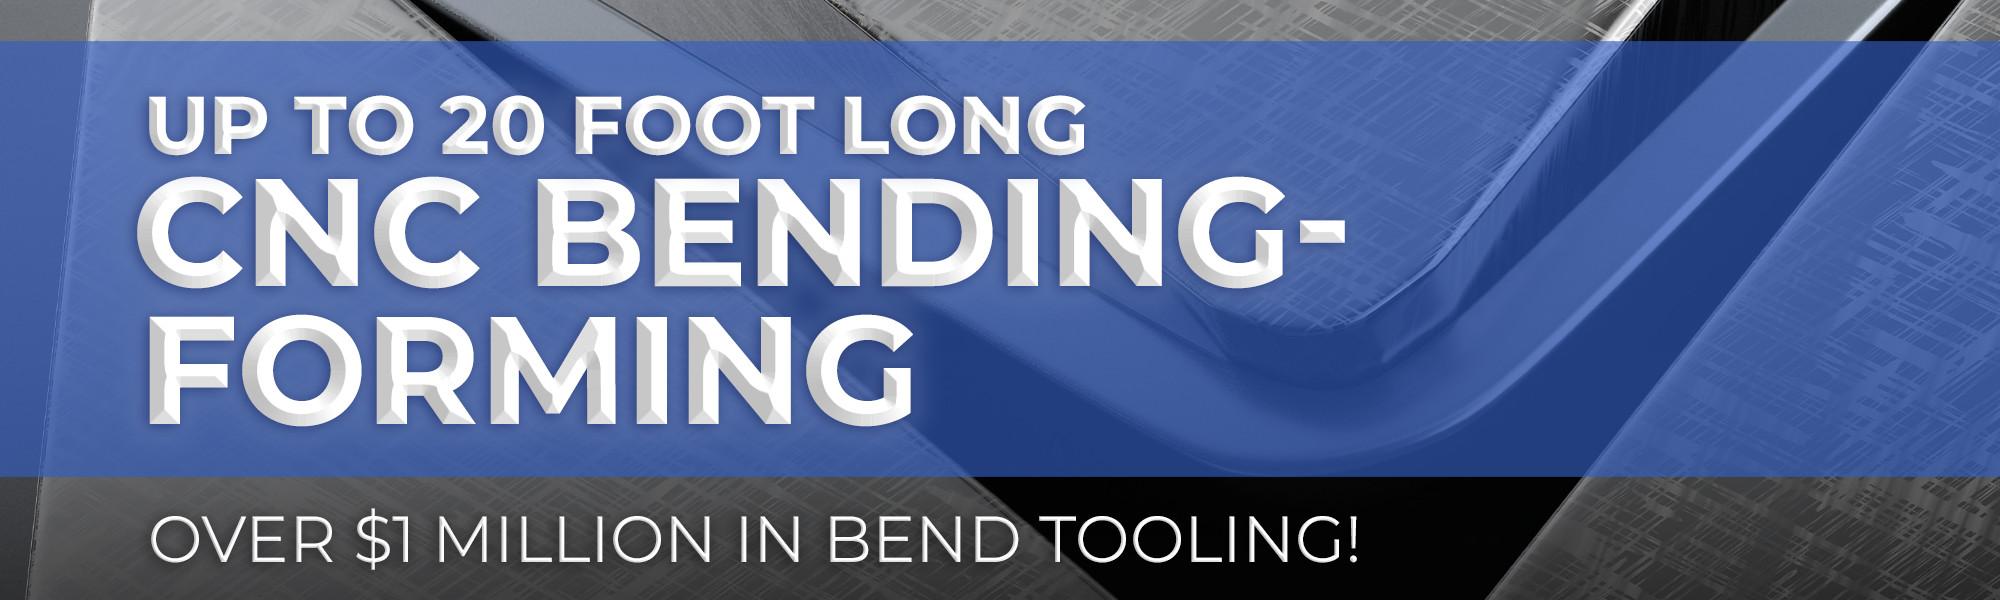 Up to 20 foot long CNC bending-forming. Over $1 million in bend tooling!